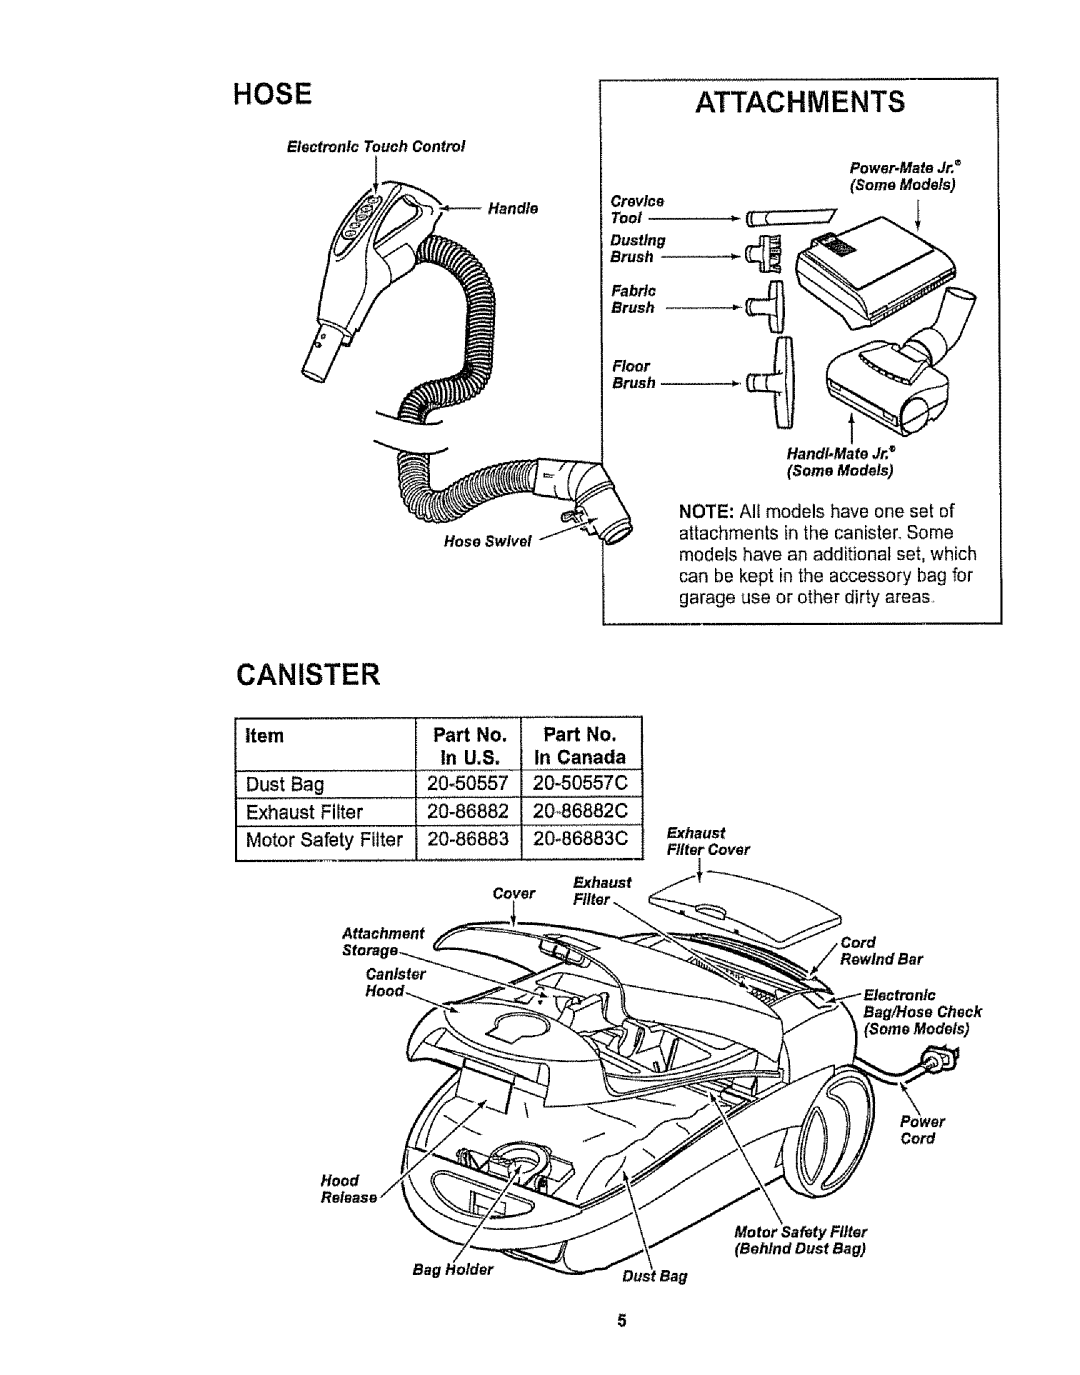 Kenmore 116.29912 Hose, Attachments, Canister, Item, Dust Bag, Exhaust Filter, Motor Safety Filter, Part No, In U.S 